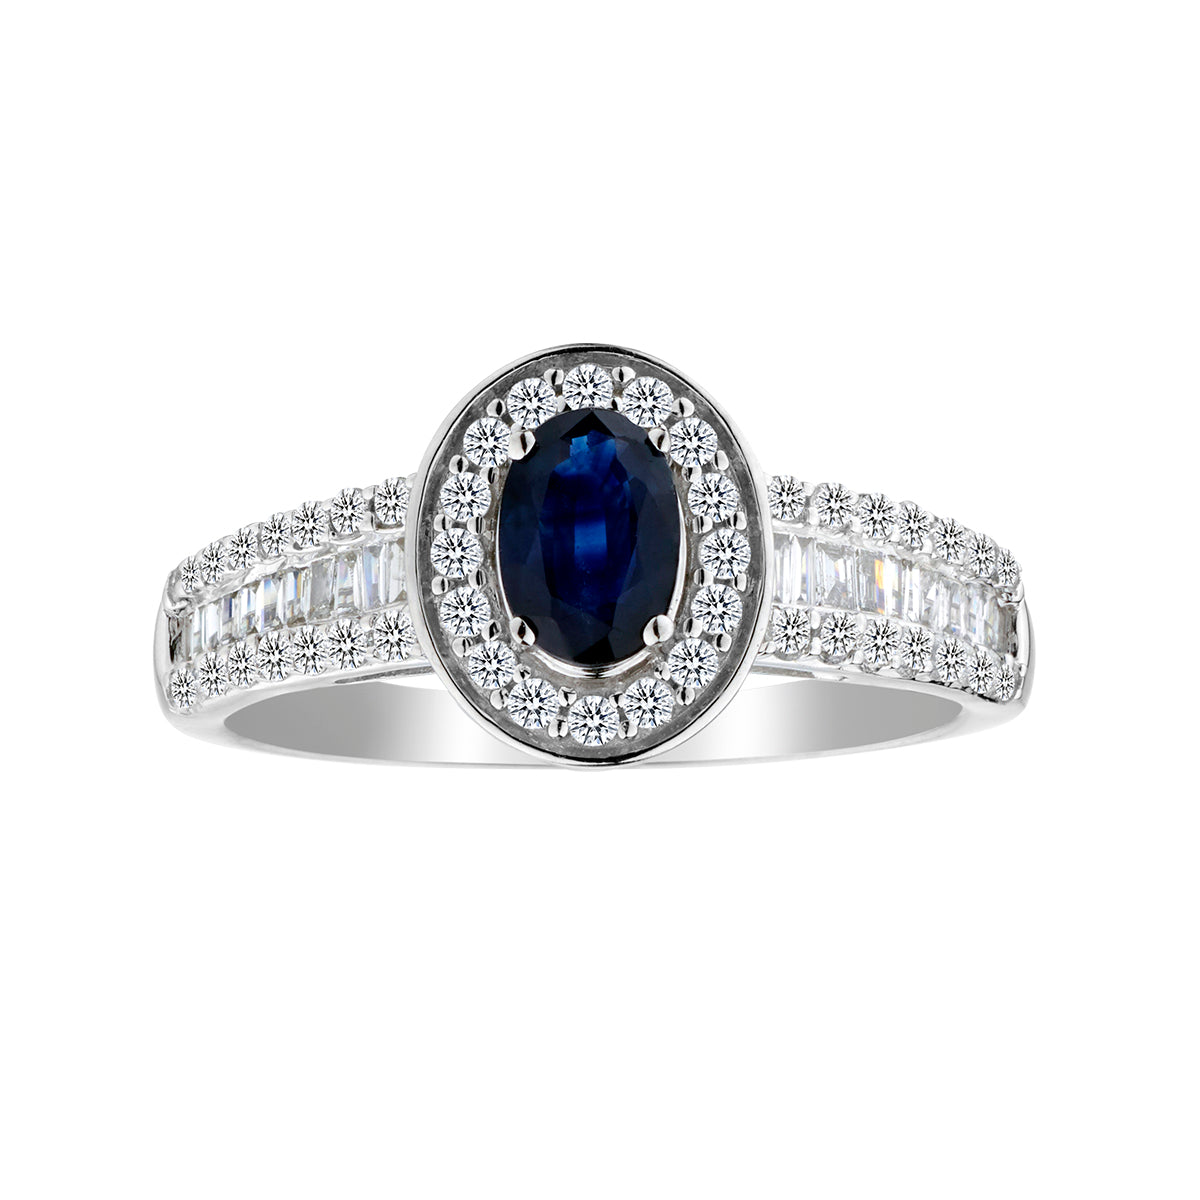 .50 Carat Oval Sapphire & Diamond Ring, 14kt White Gold.......................NOW